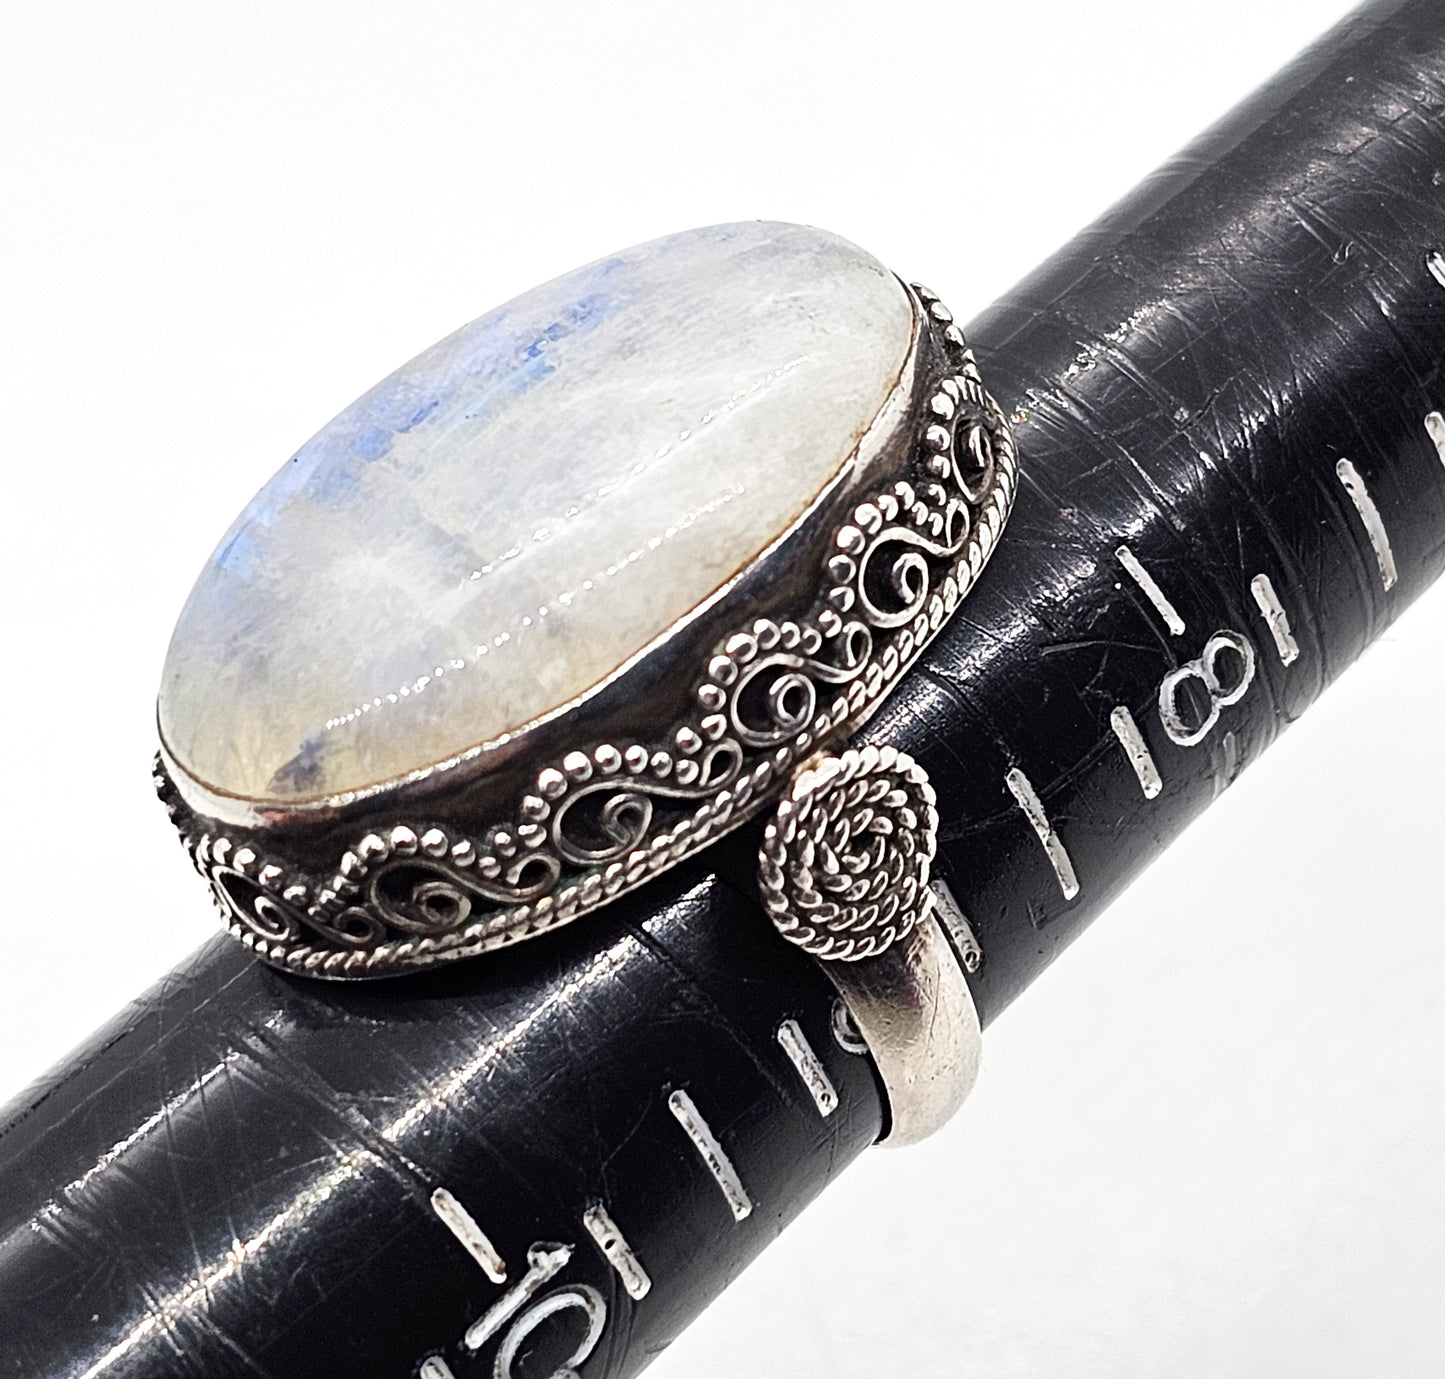 XL Rainbow Blue moonstone bali Balinese tribal spiral sterling silver ring size 9